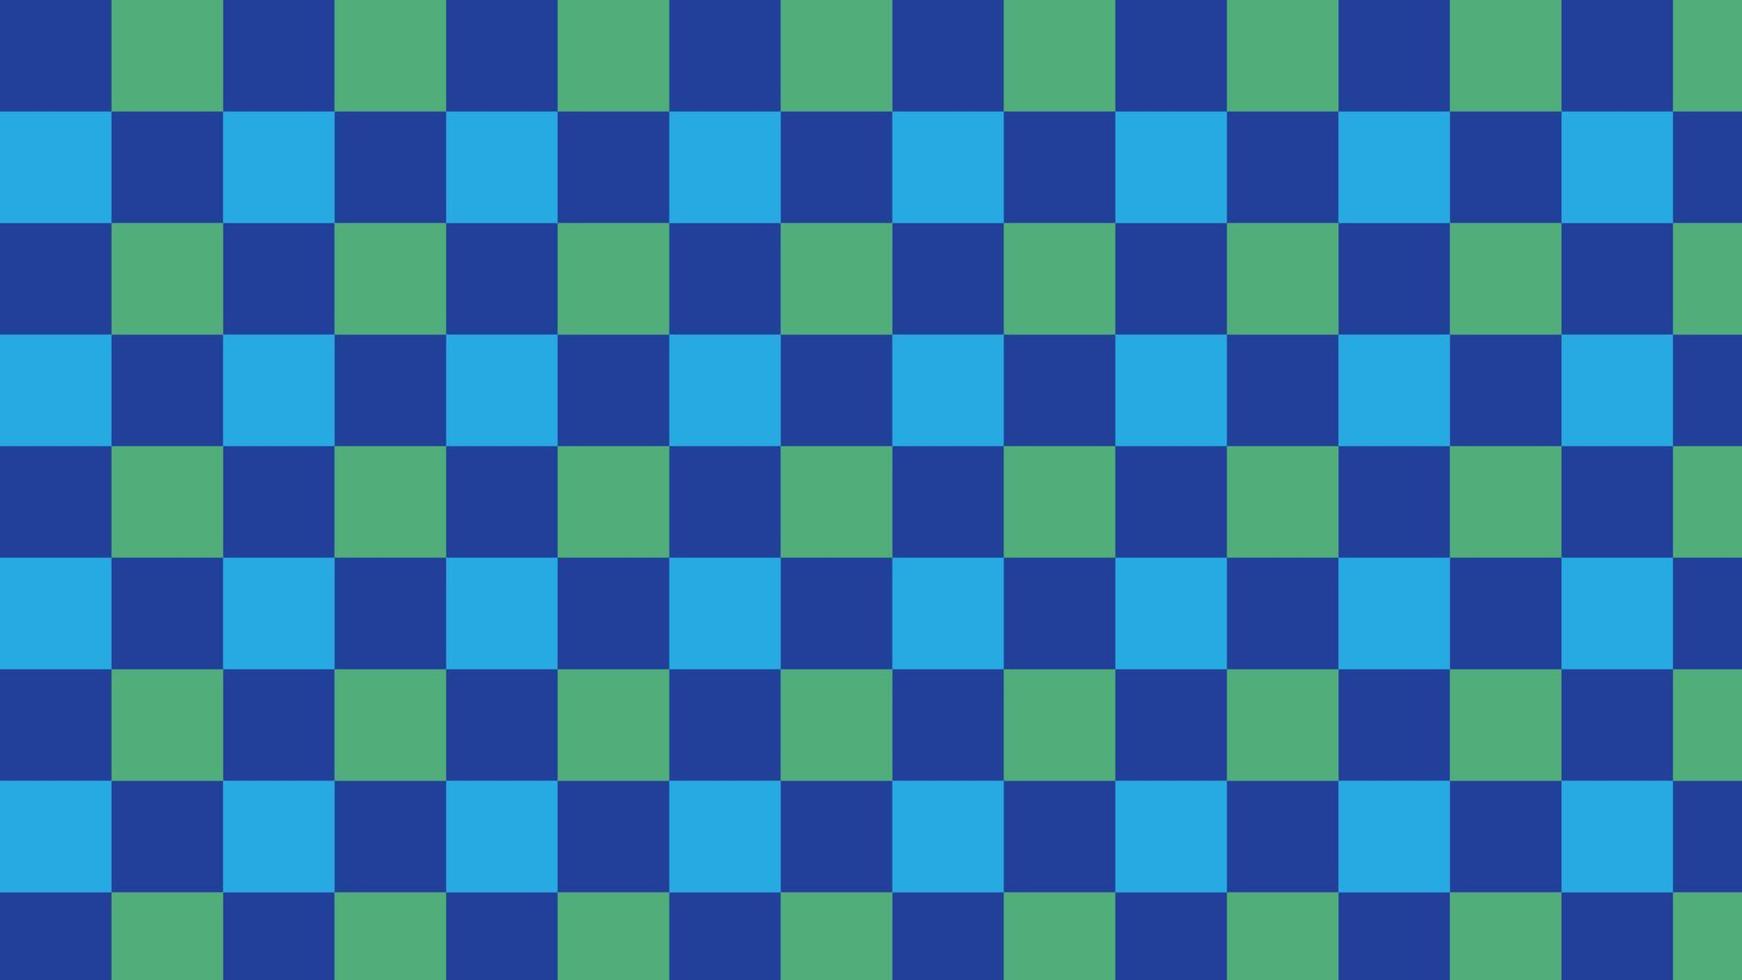 green and blue checkers, gingham, plaid, checkerboard wallpaper illustration, perfect for wallpaper, backdrop, postcard, background vector